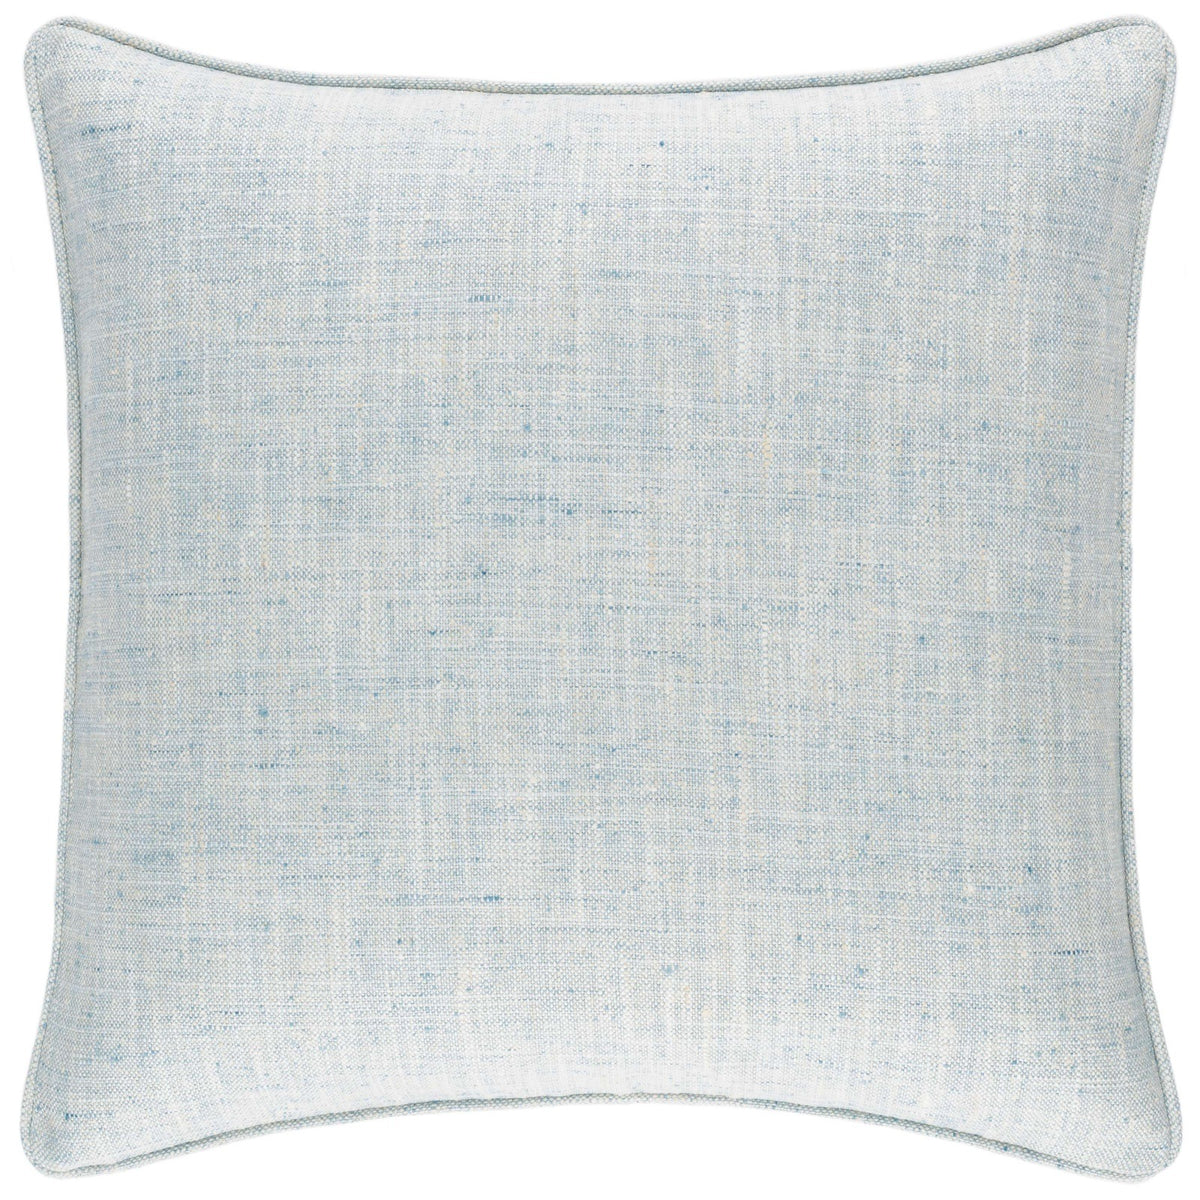 Pine Cone Hill Greylock Soft Blue Indoor/Outdoor Decorative Pillow